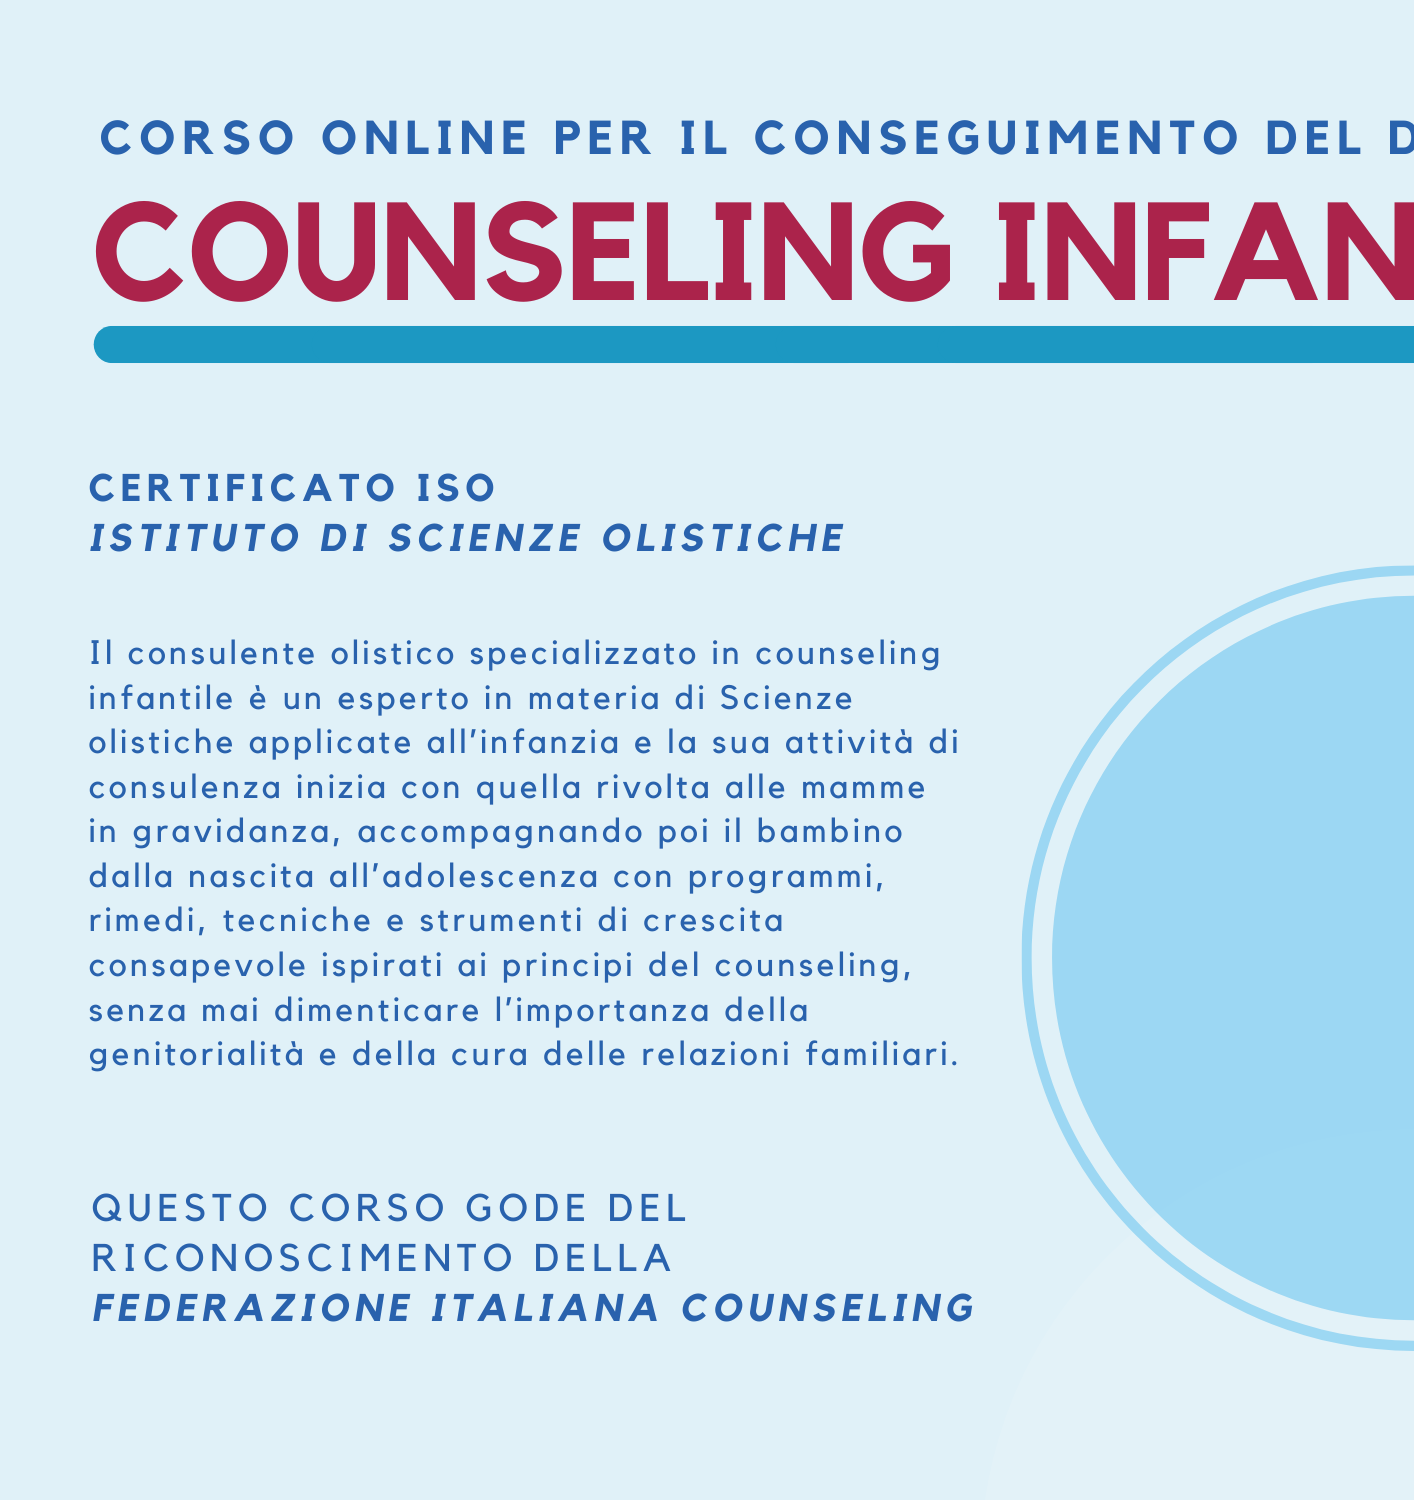 Counseling infantile